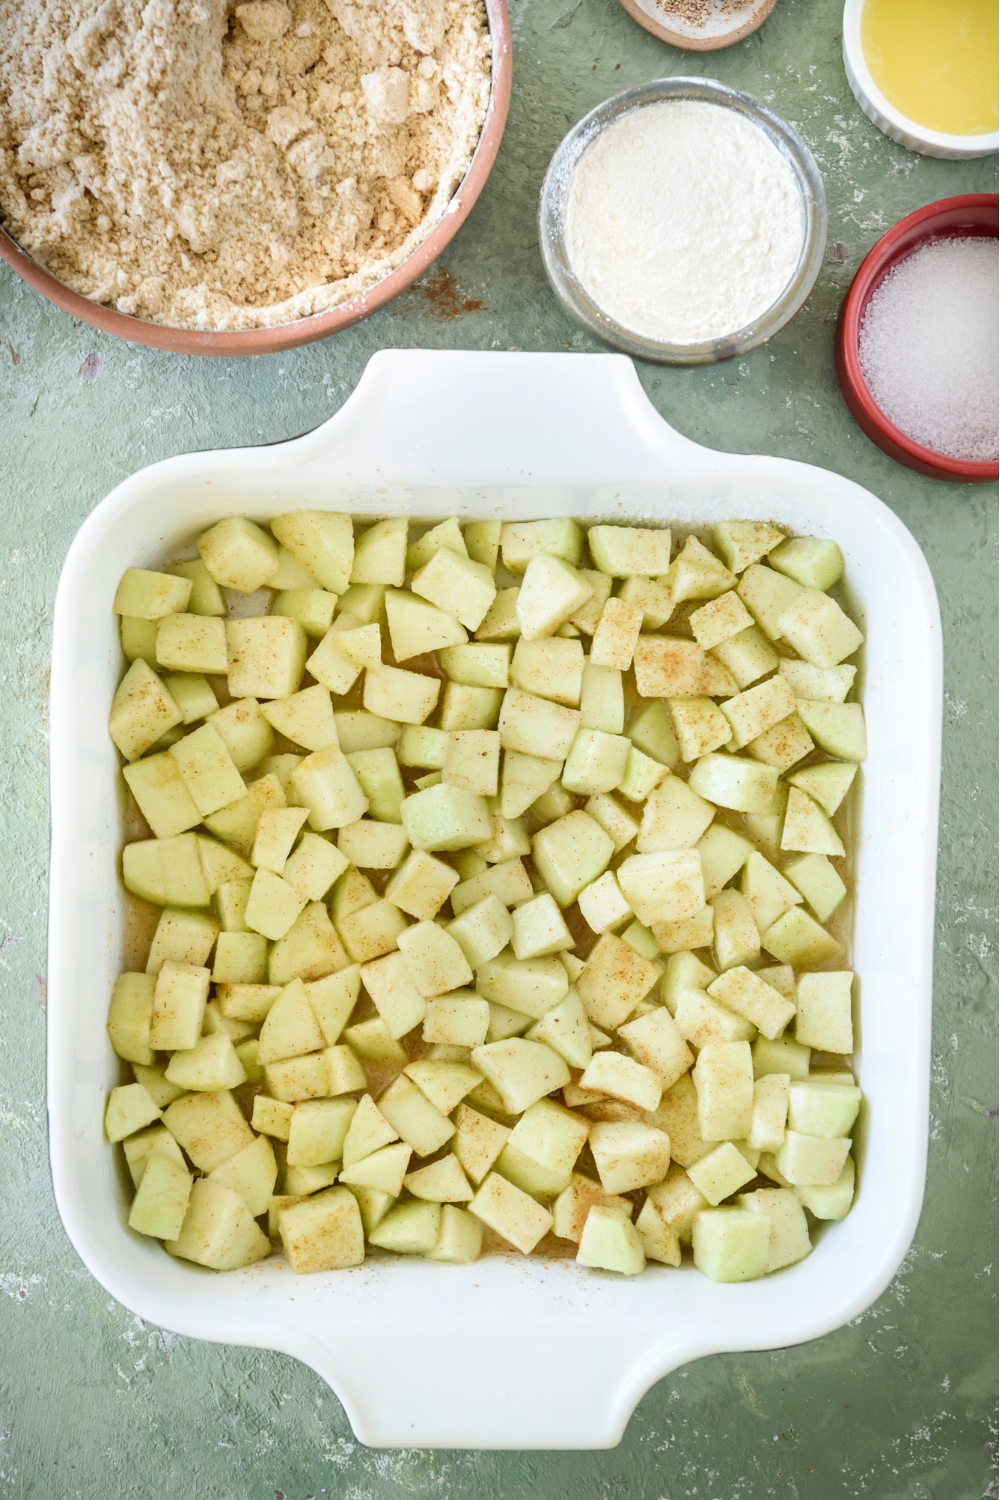 A baking dish filled with diced apples covered in spices.